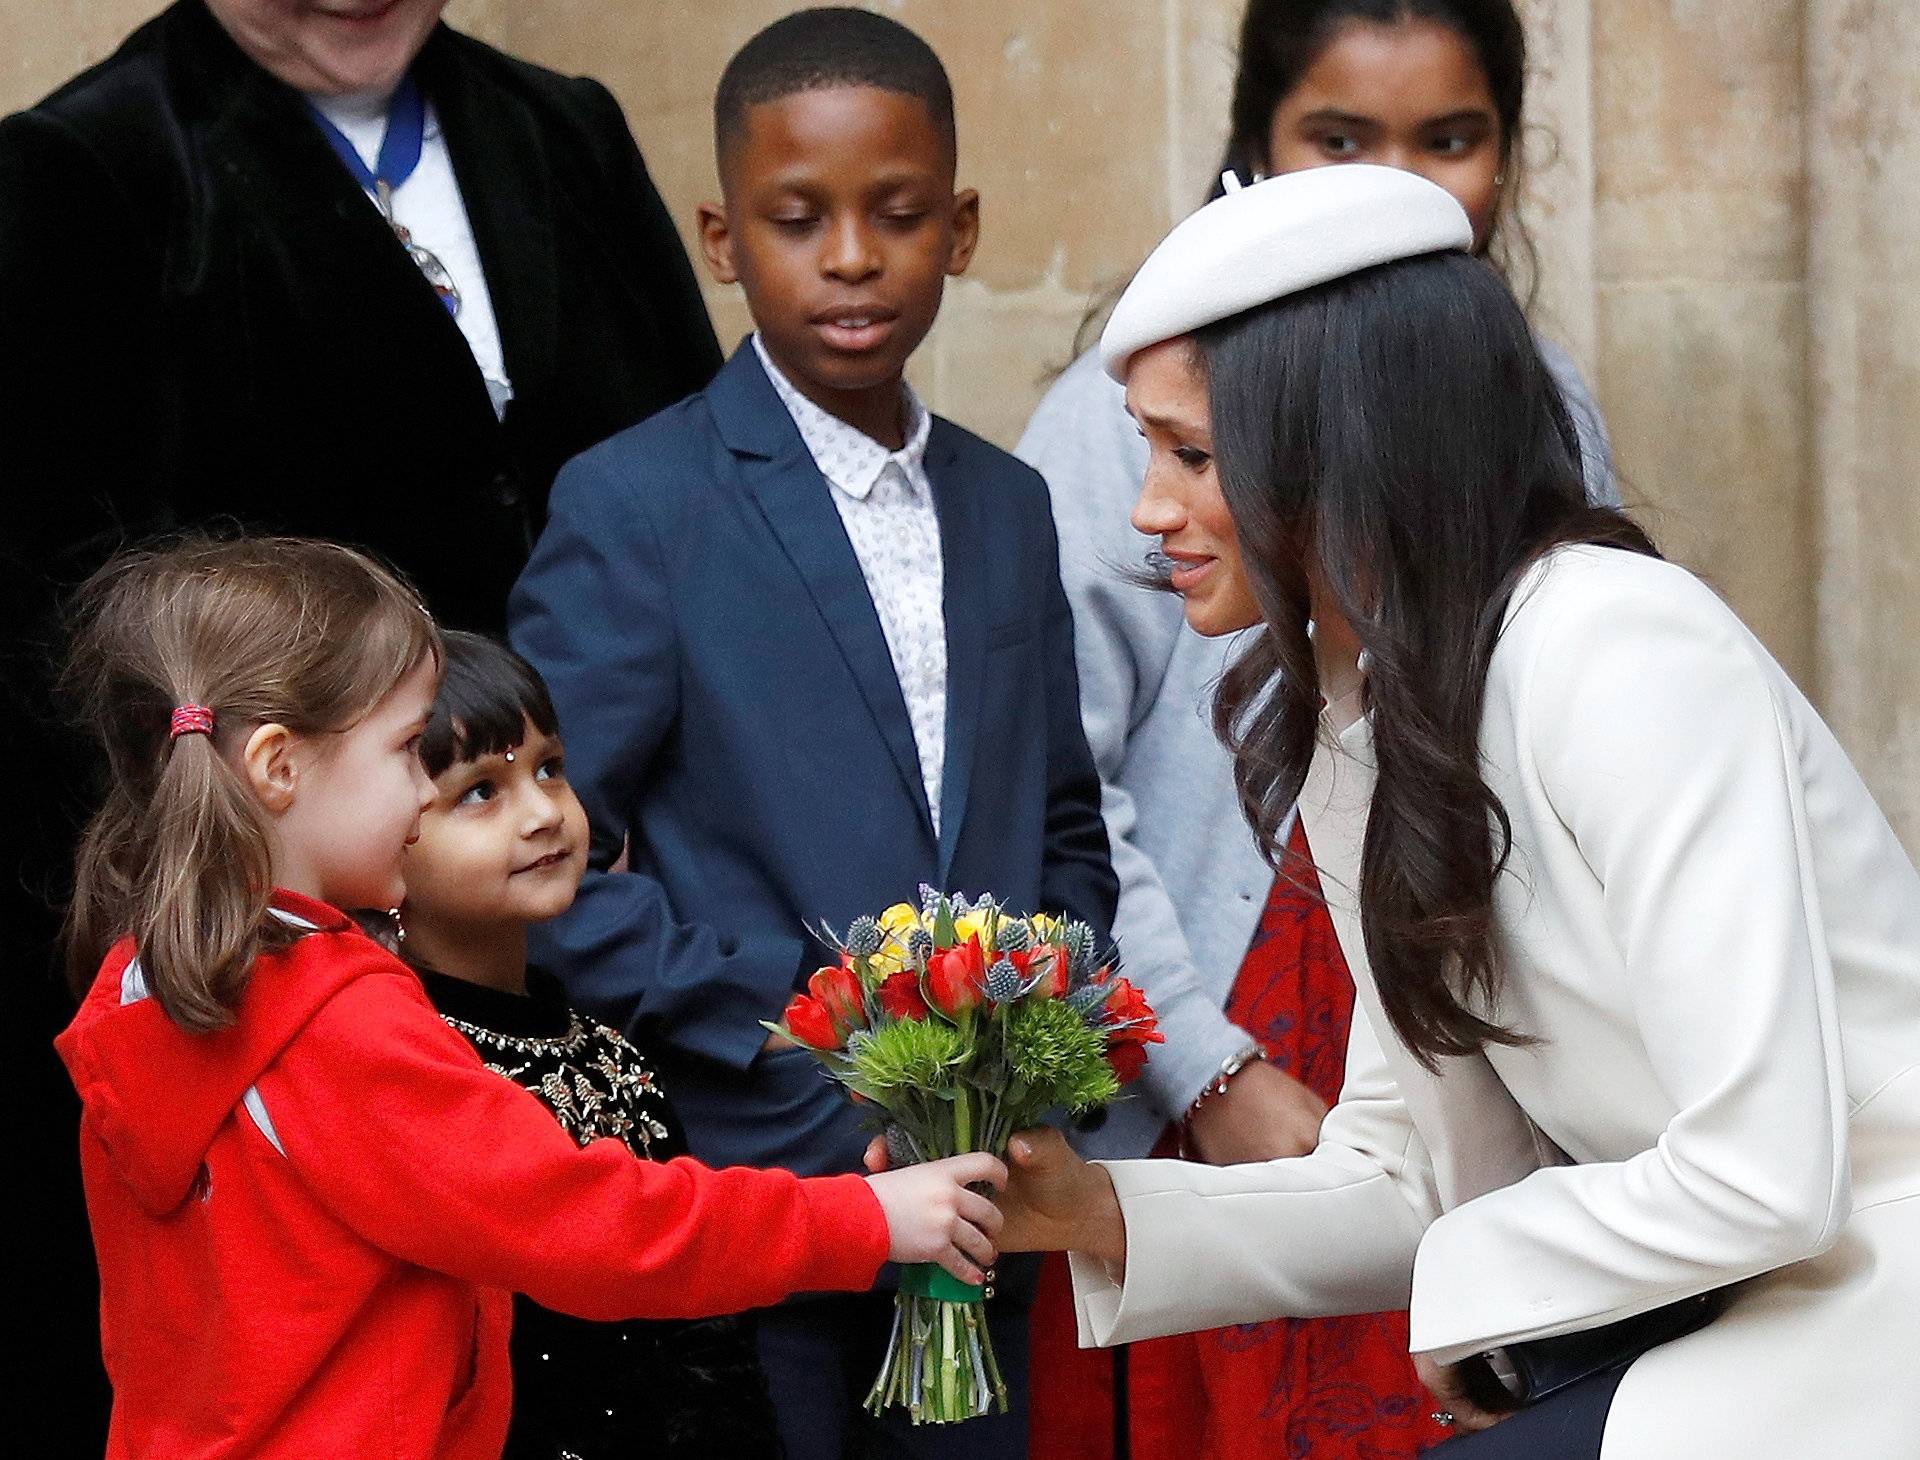 Britain's Prince Harry's fiancee Meghan Markle receives a bouquet of flowers after attending the Commonwealth Service at Westminster Abbey in London